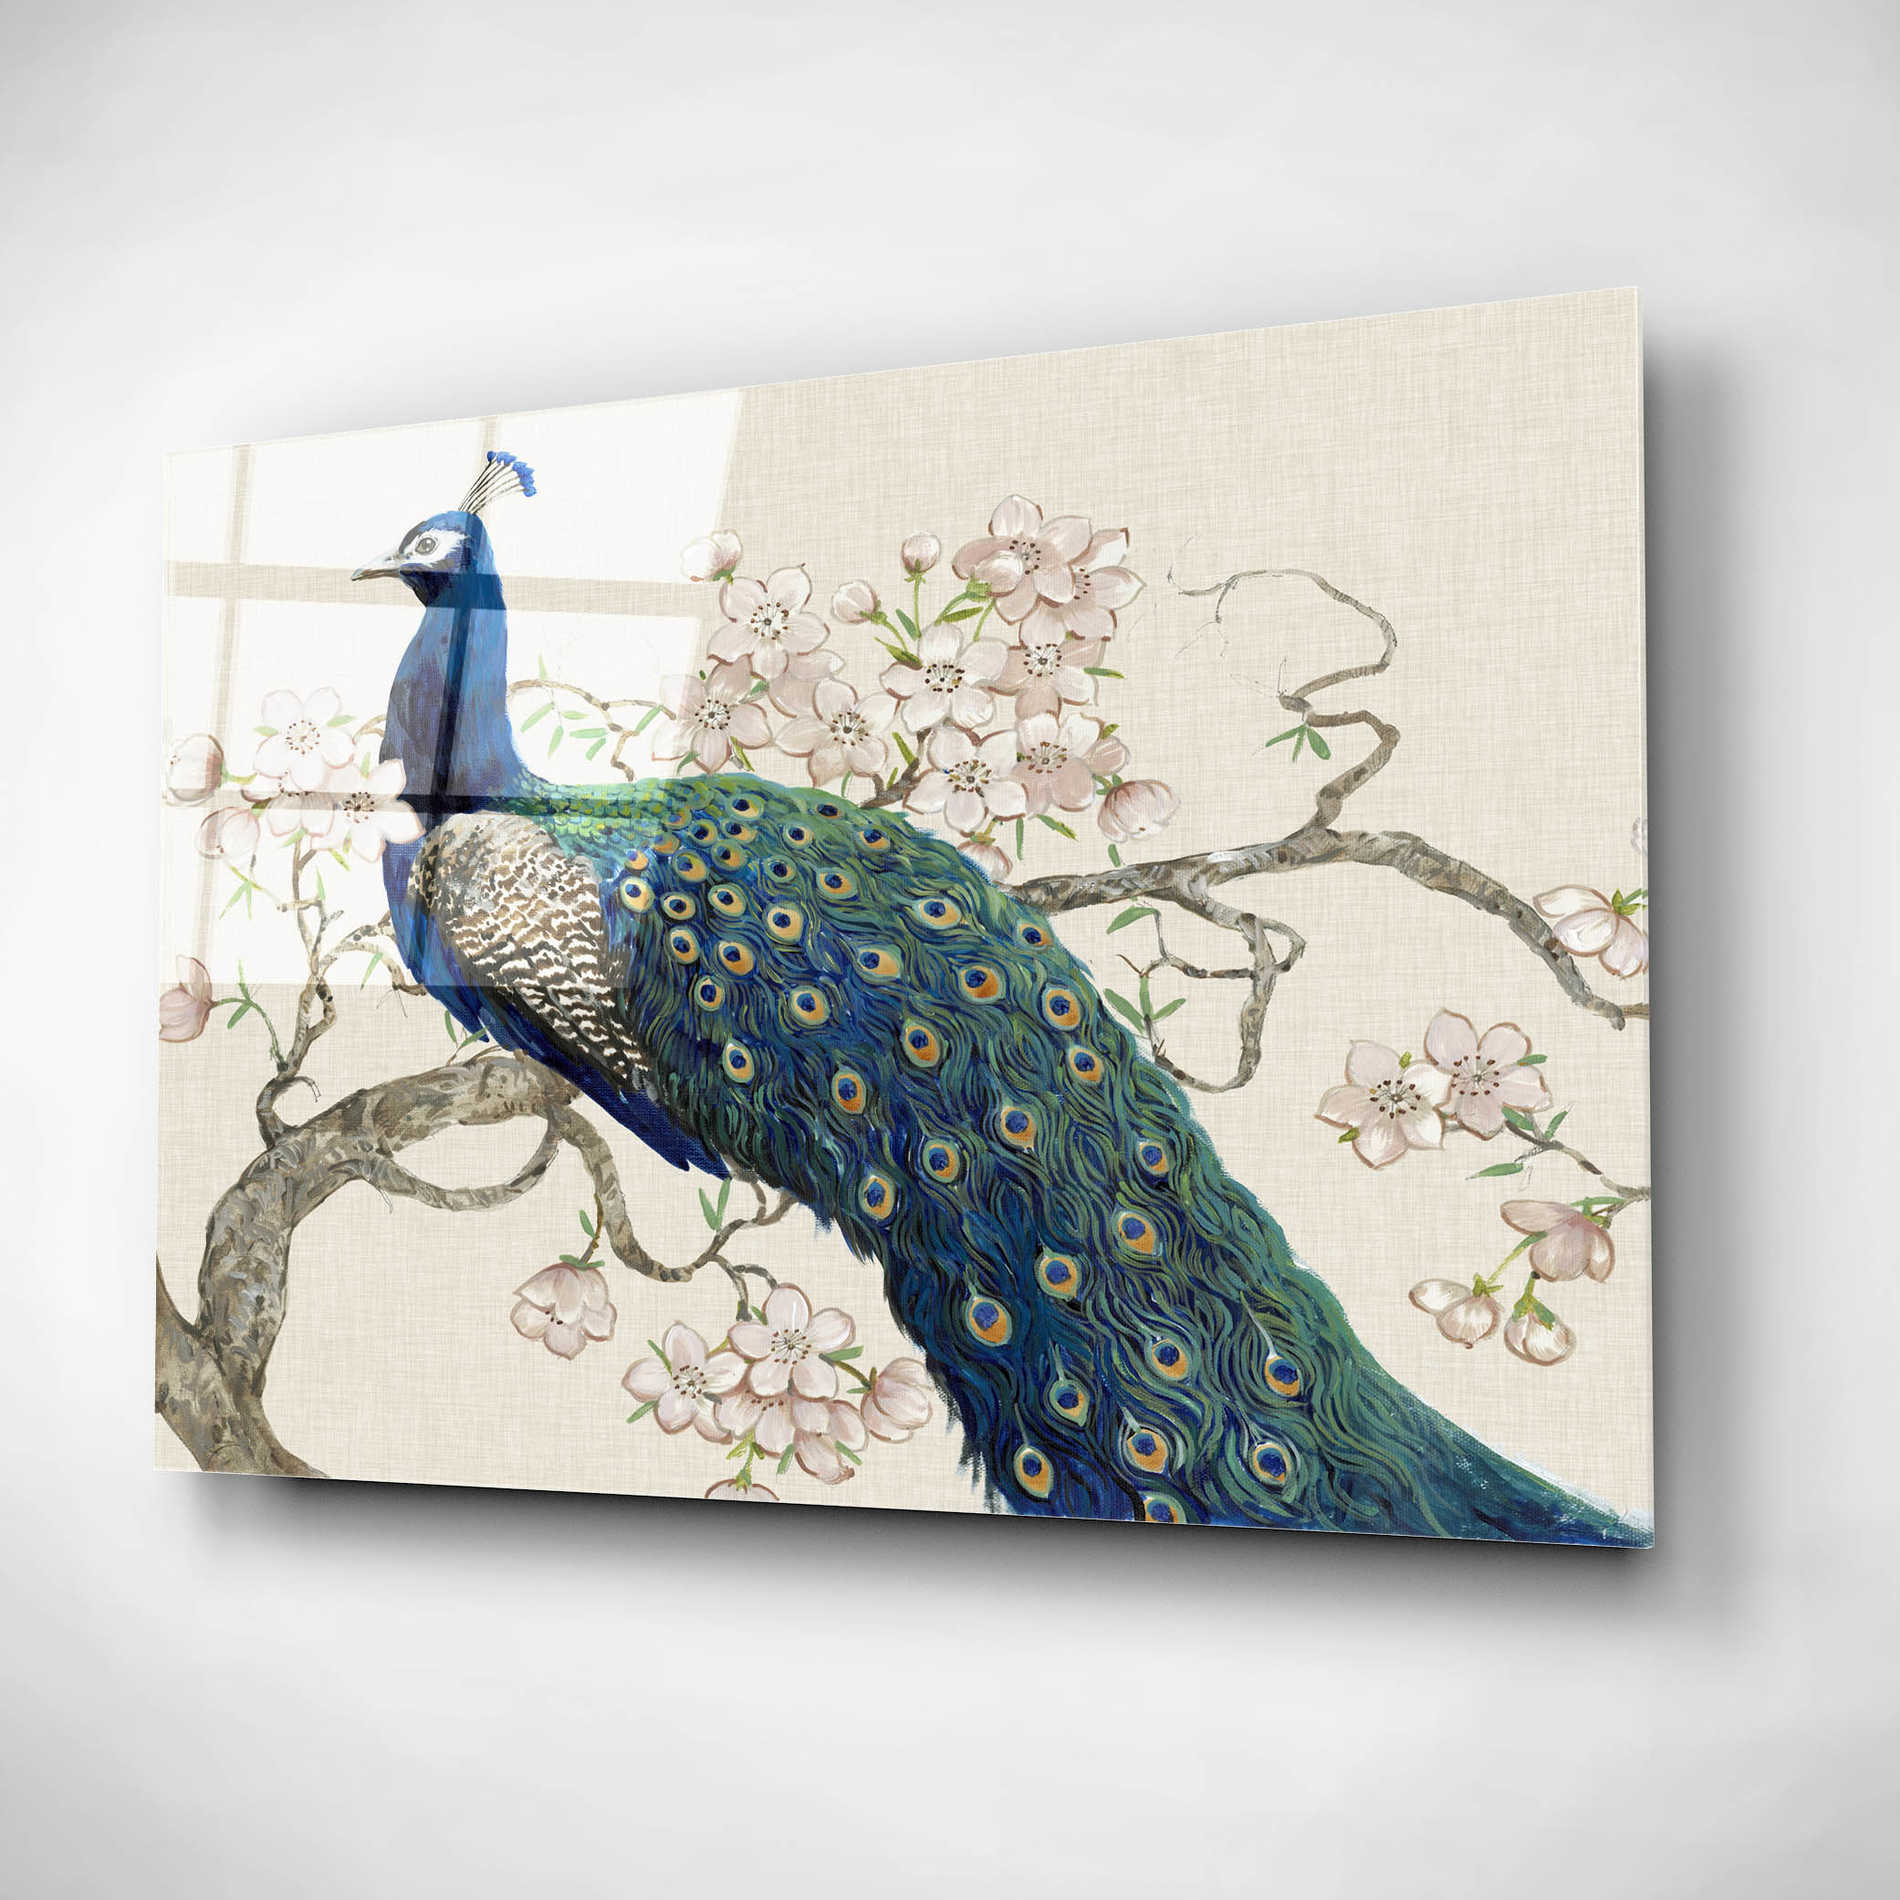 Epic Art 'Peacock & Blossoms II' by Tim O'Toole, Acrylic Glass Wall Art,24x16